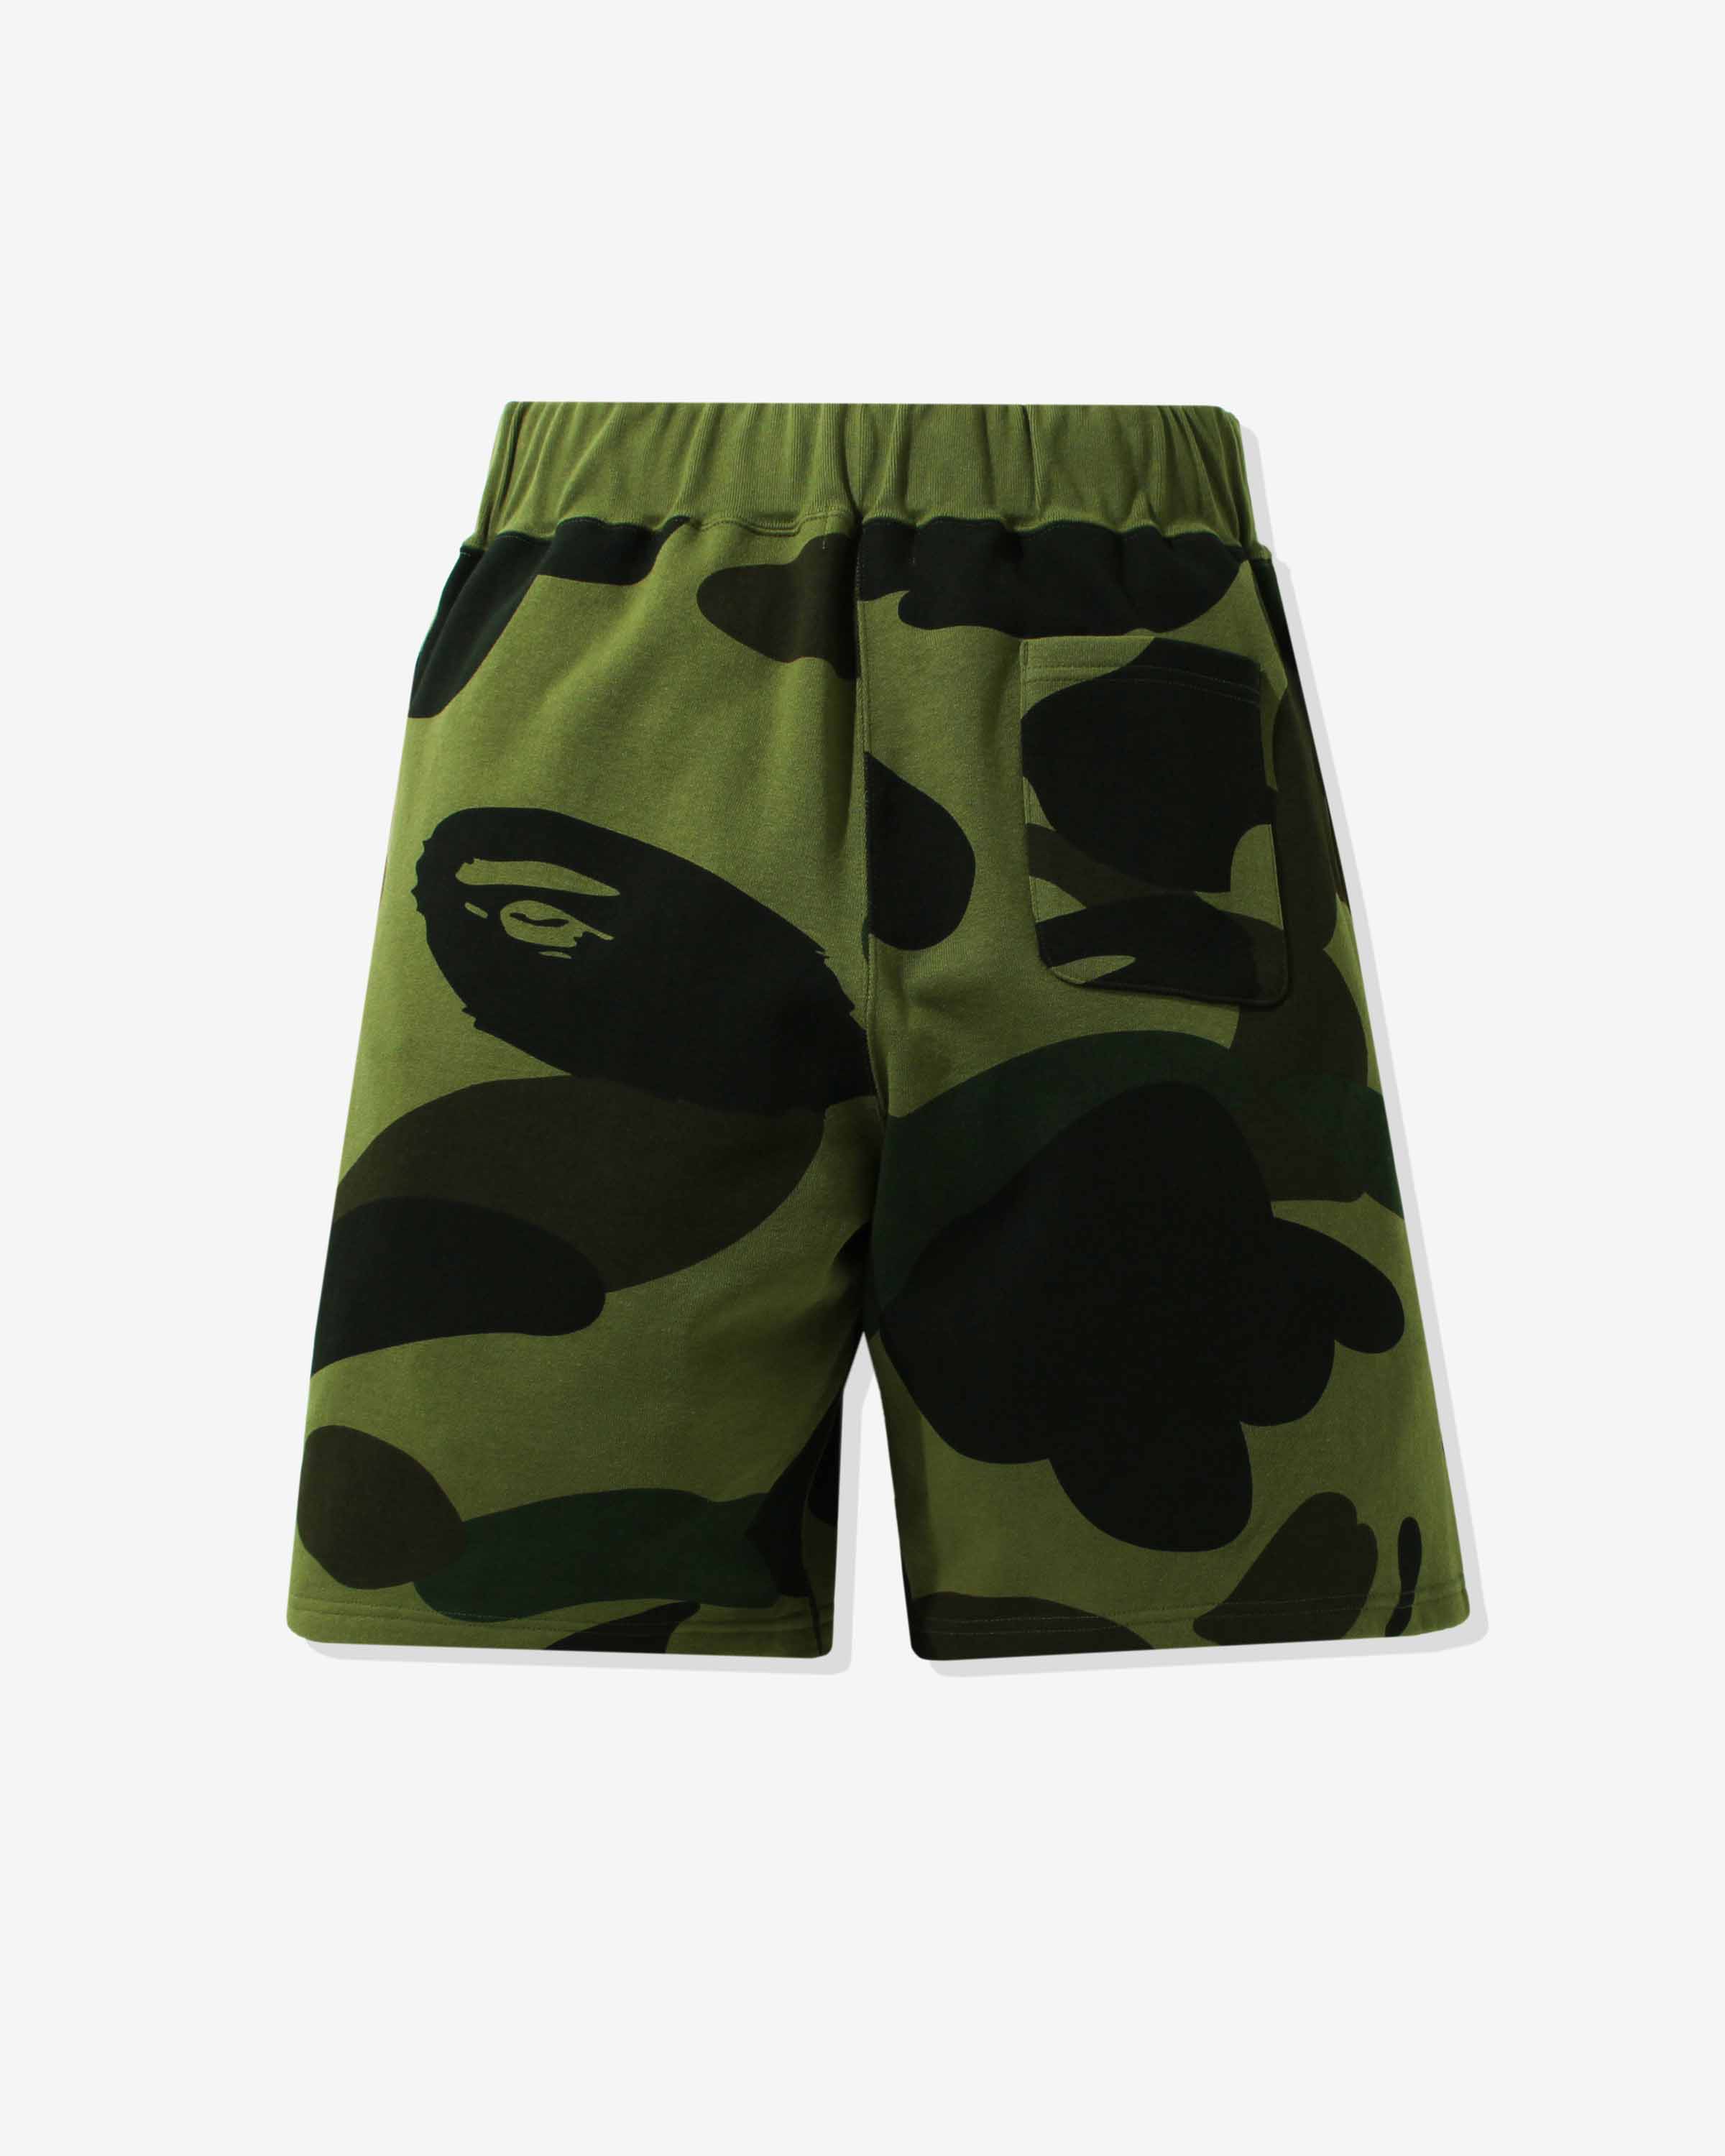 SWEAT WIDE SHORTS 1ST FIT BAPE CAMO – Undefeated GIANT